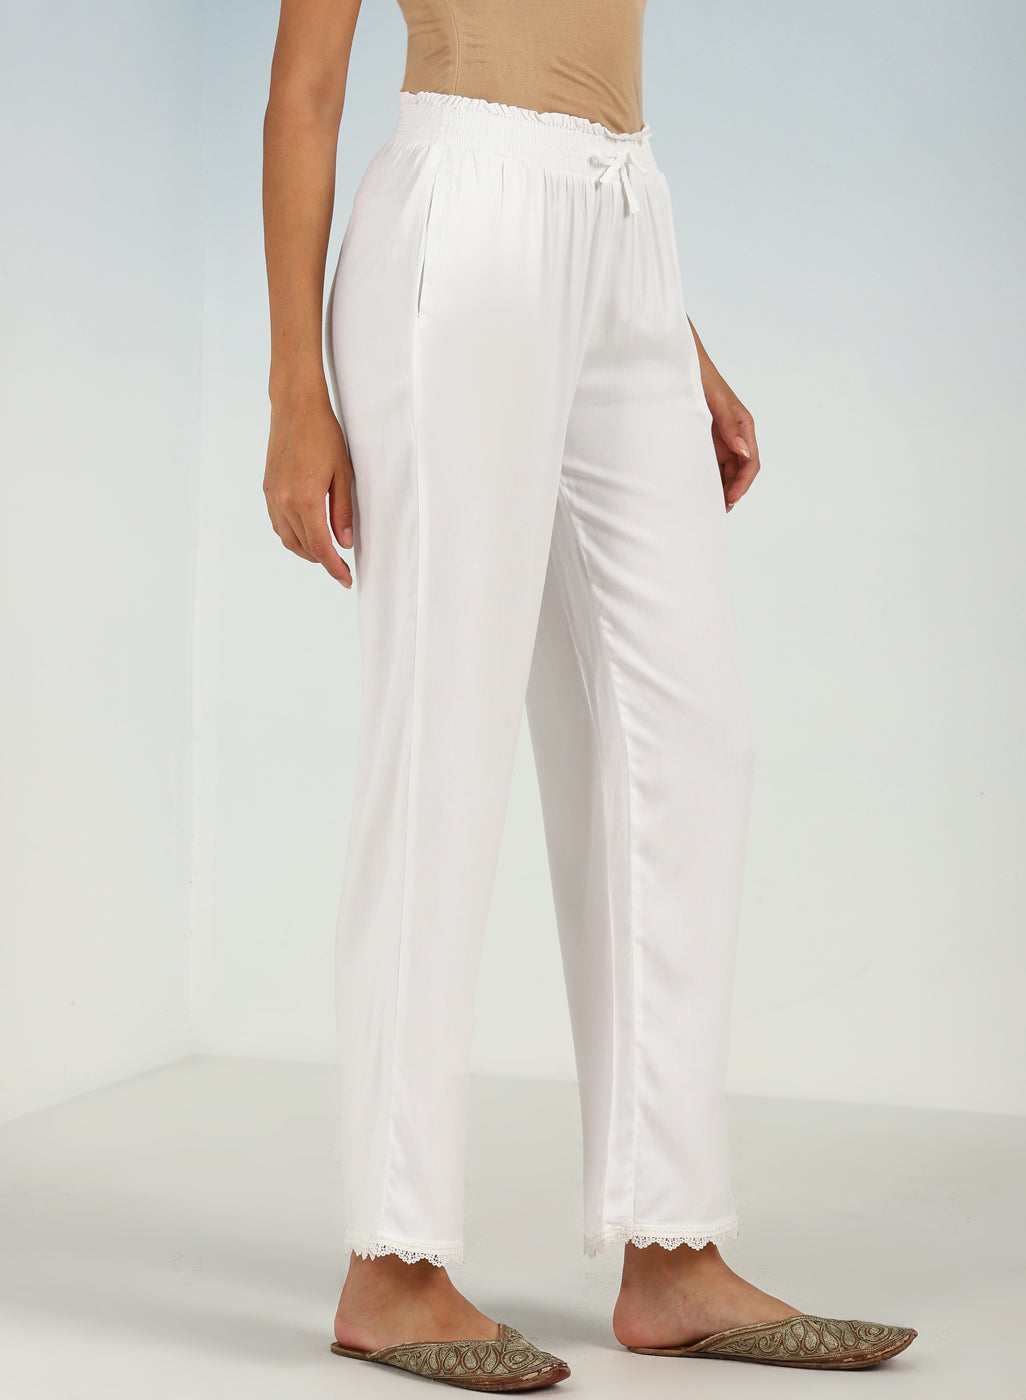 Drawstring Pants in ivory for women